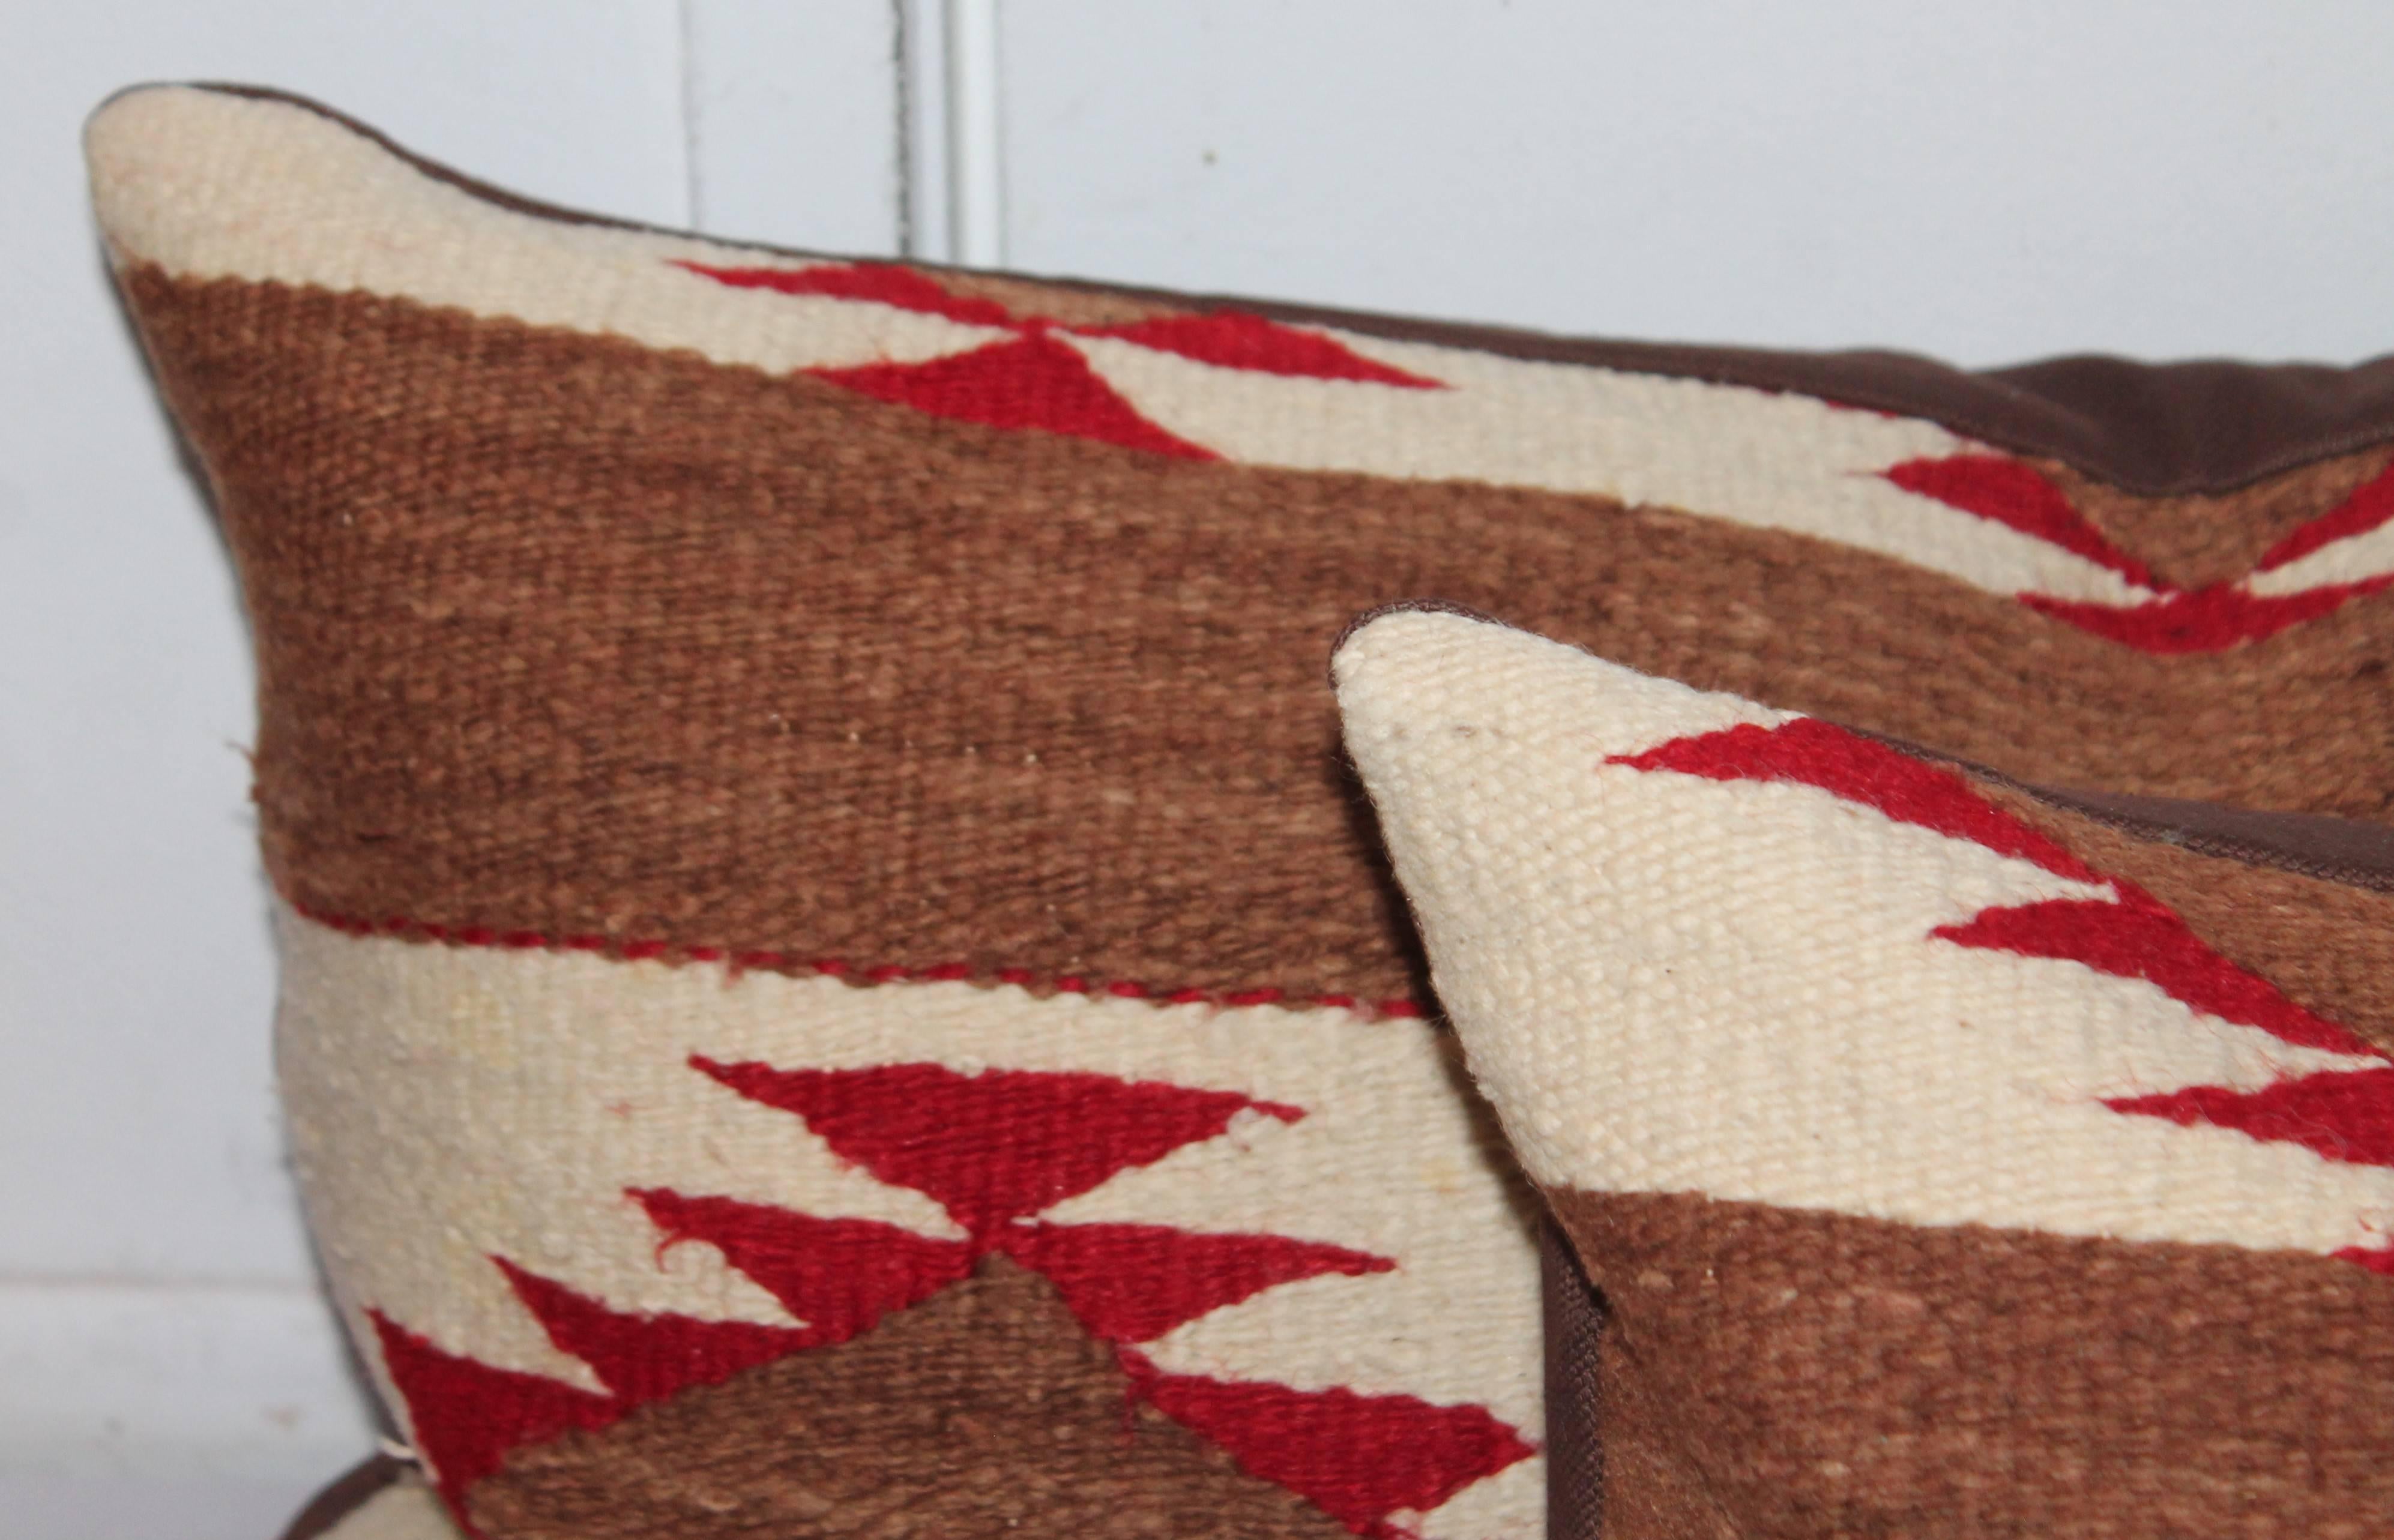 These amazing bolster pillows are handwoven and have brown chocolate linen backings. These pillows were cut from a very early Navajo weaving.